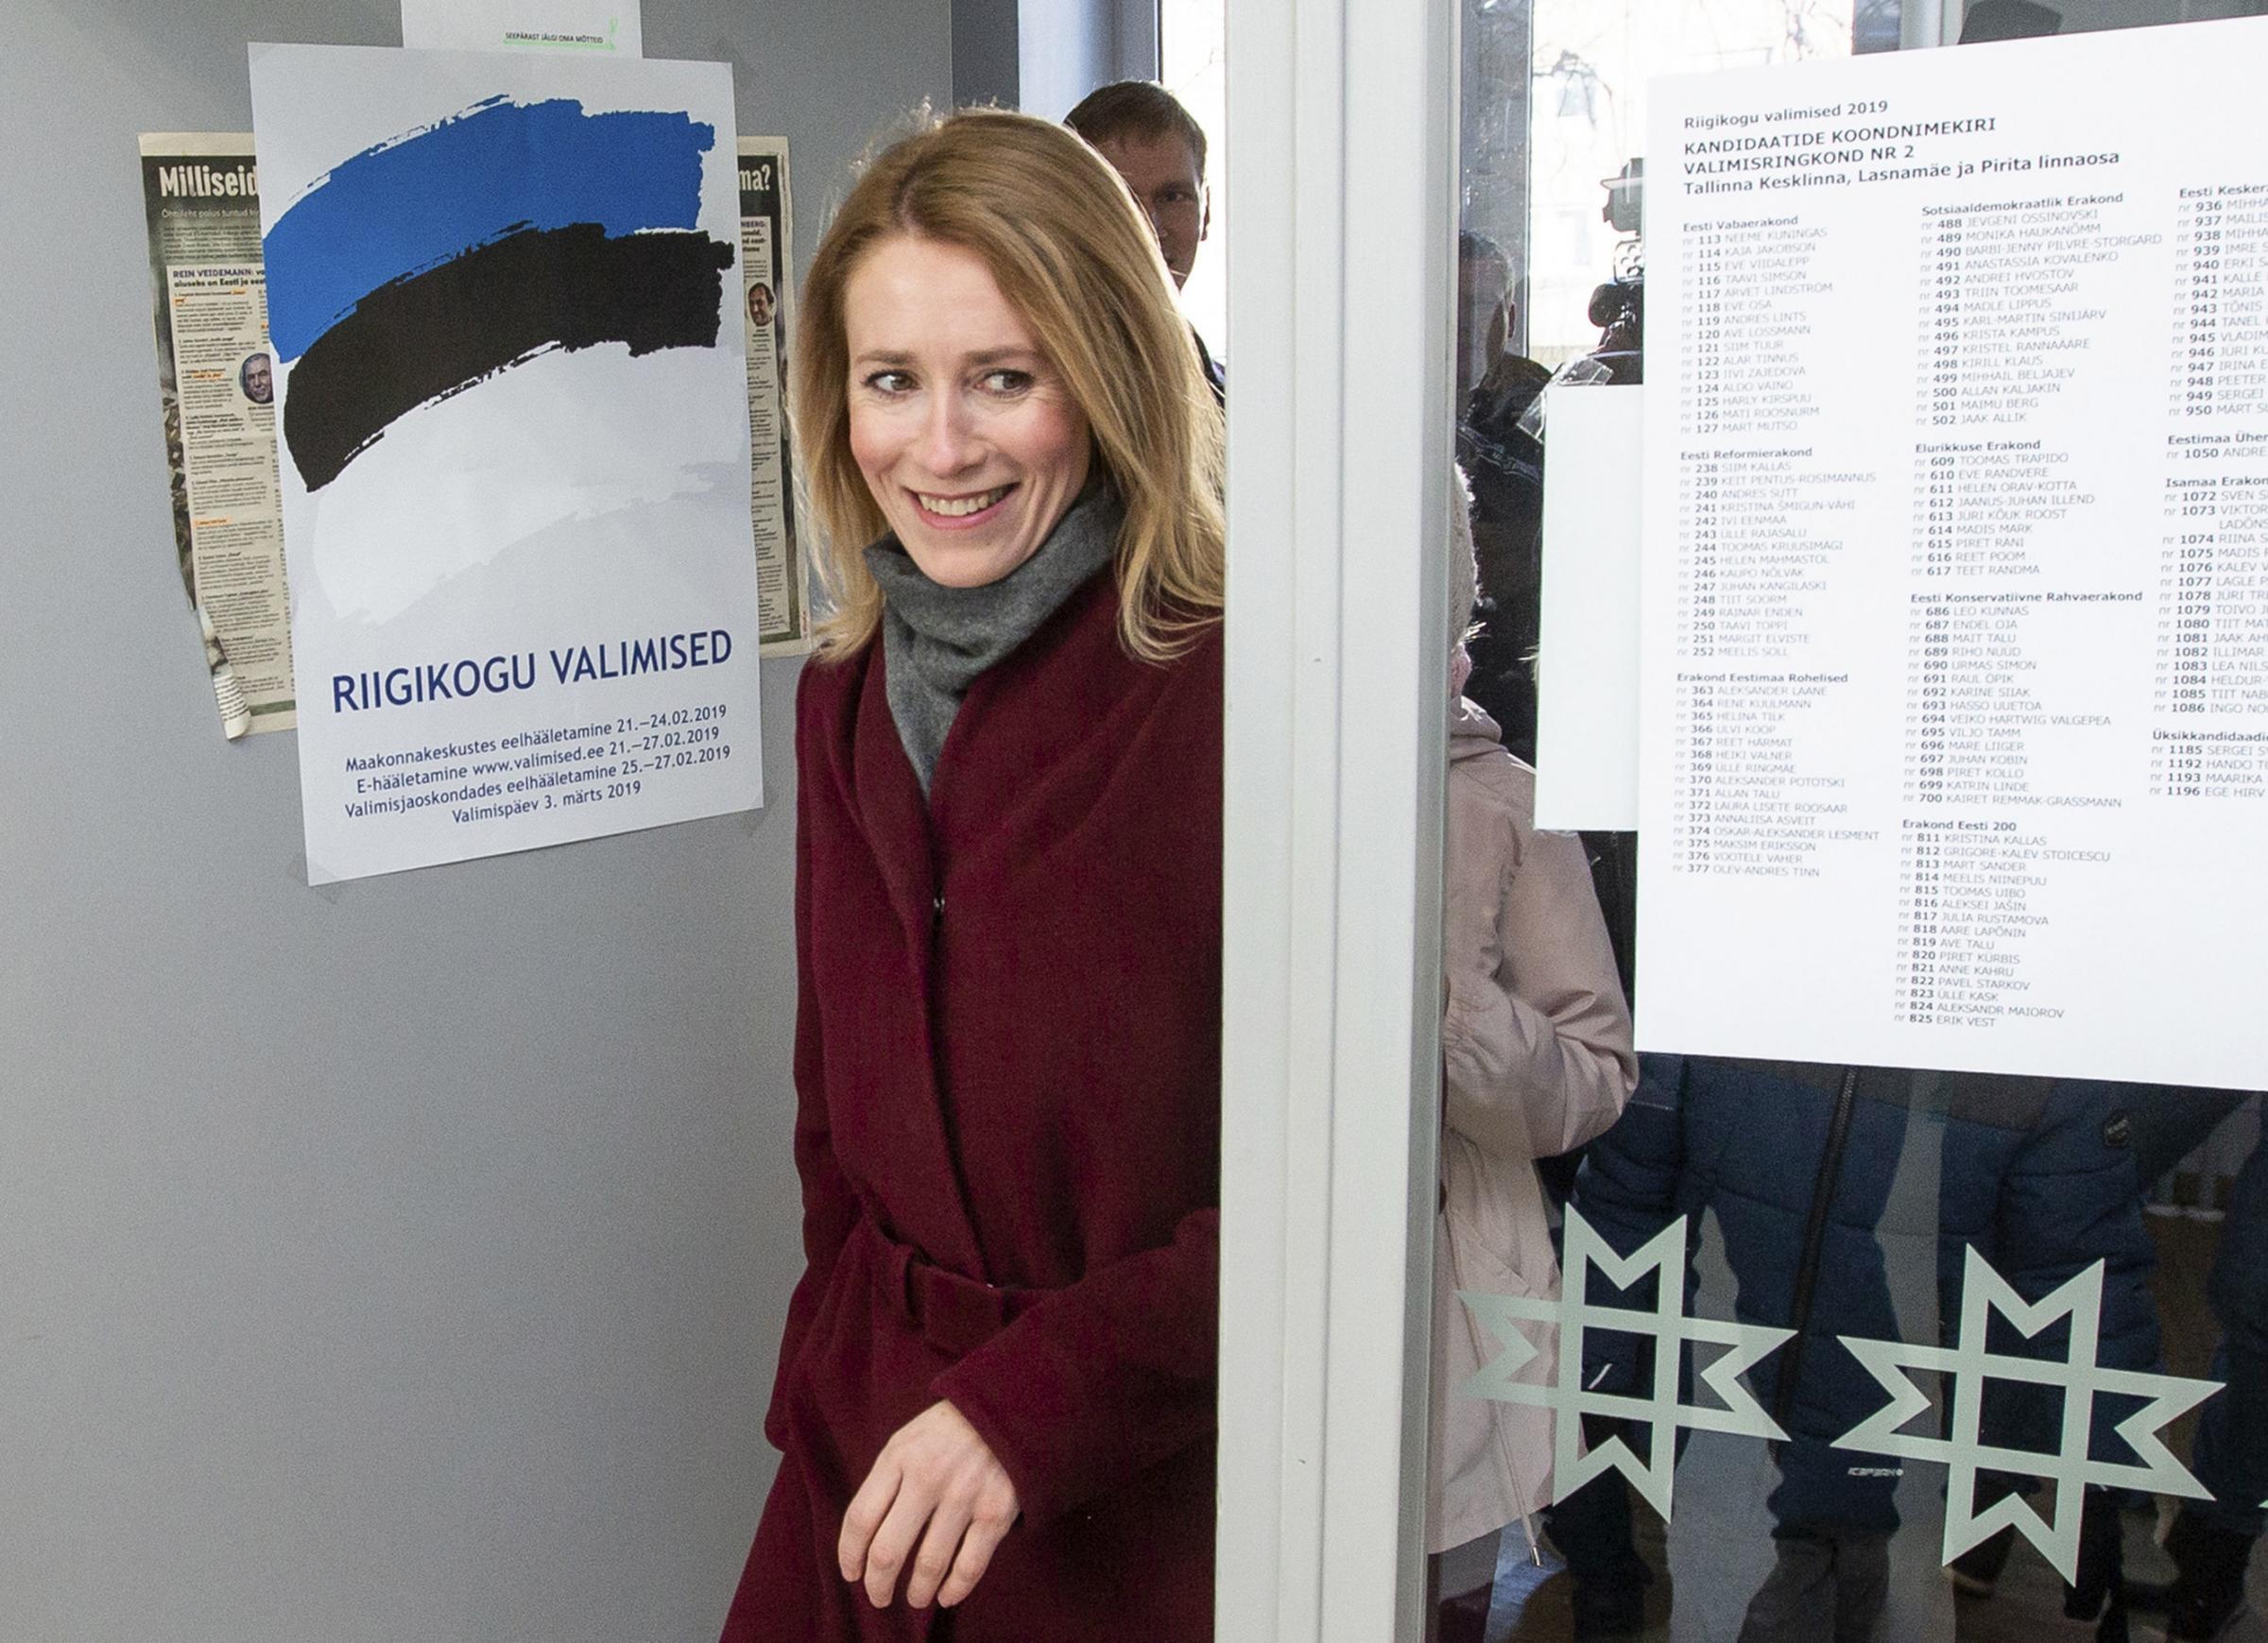 Chairwoman of the Reform Party Kaja Kallas arrives at a polling station during a parliamentary elections in Tallinn, Estonia, Sunday, March 3, 2019. Estonians are voting in a parliamentary election Sunday in the small Baltic nation in a ballot where